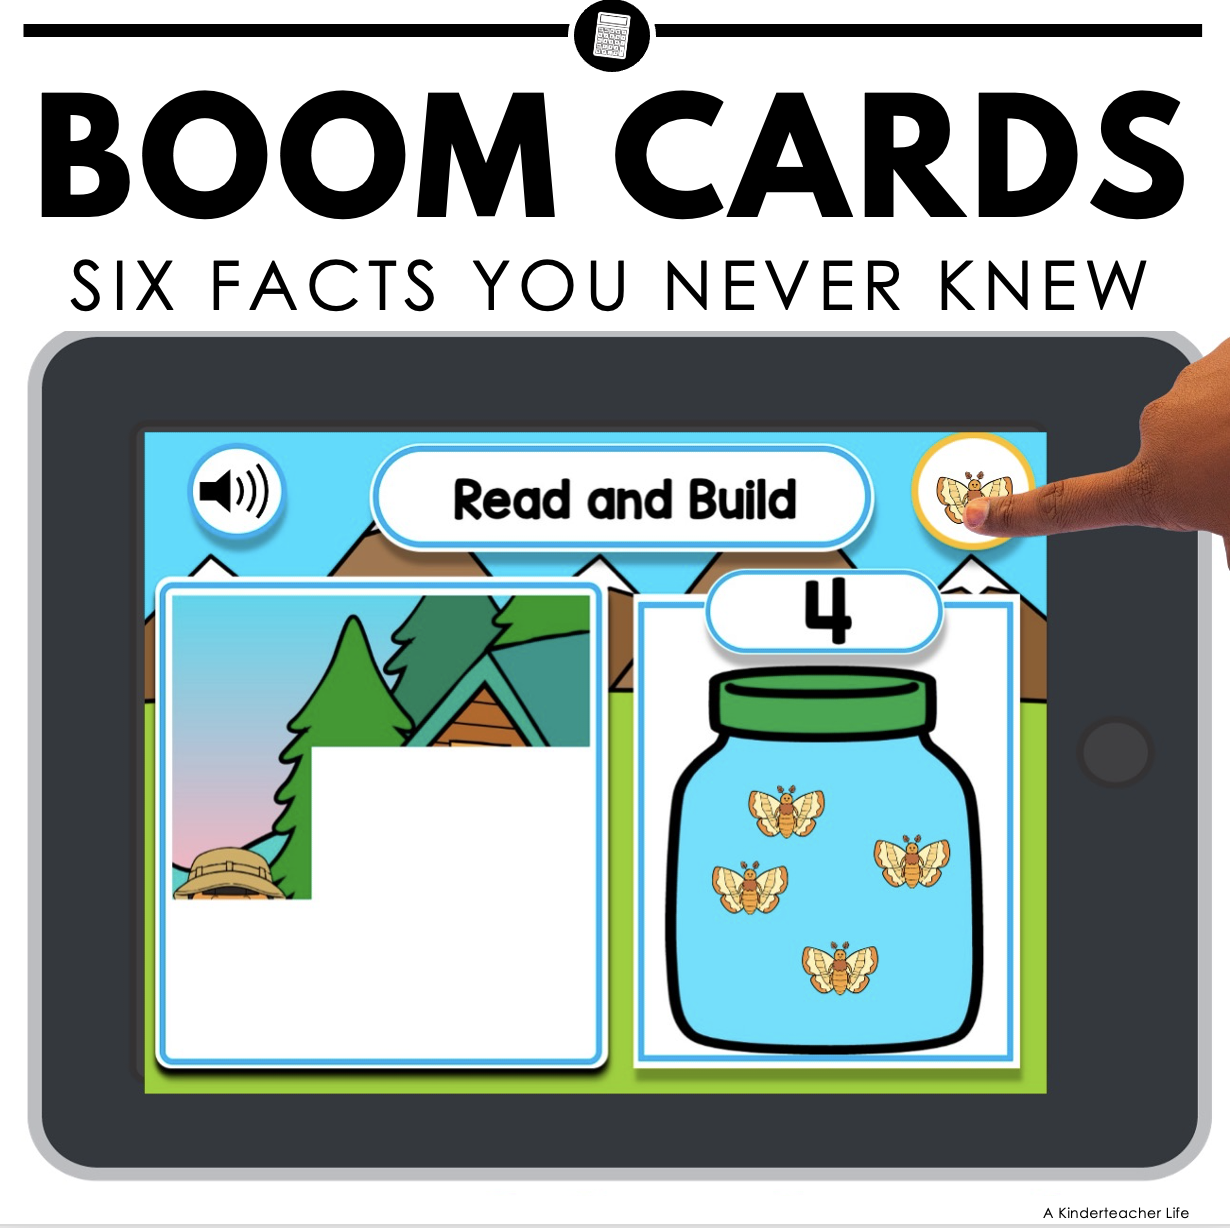 Six Facts You Never Knew About Boom Cards